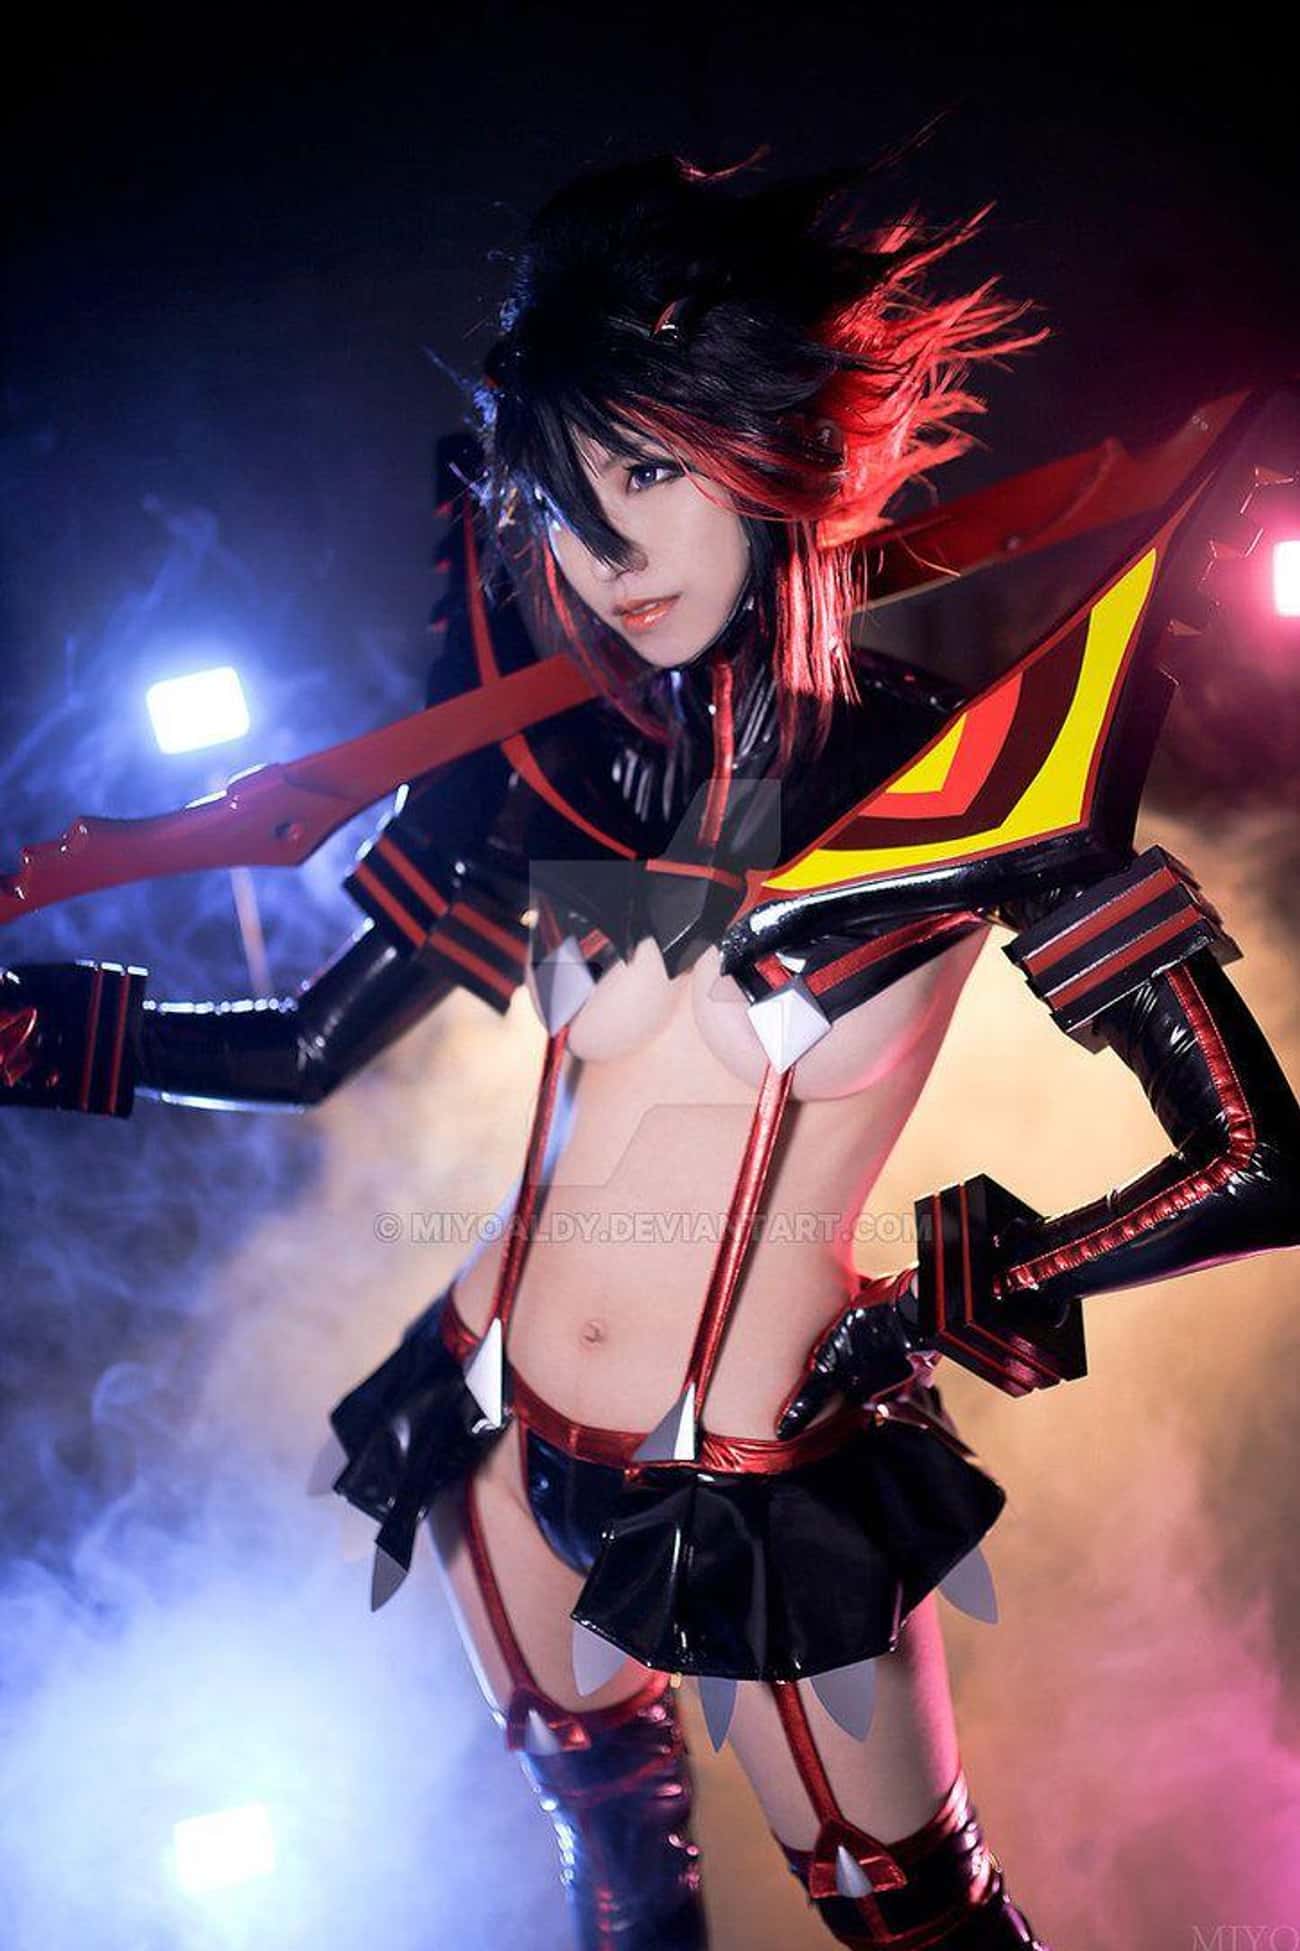 Ryuko Stands Tall In Scantly Clad Armor